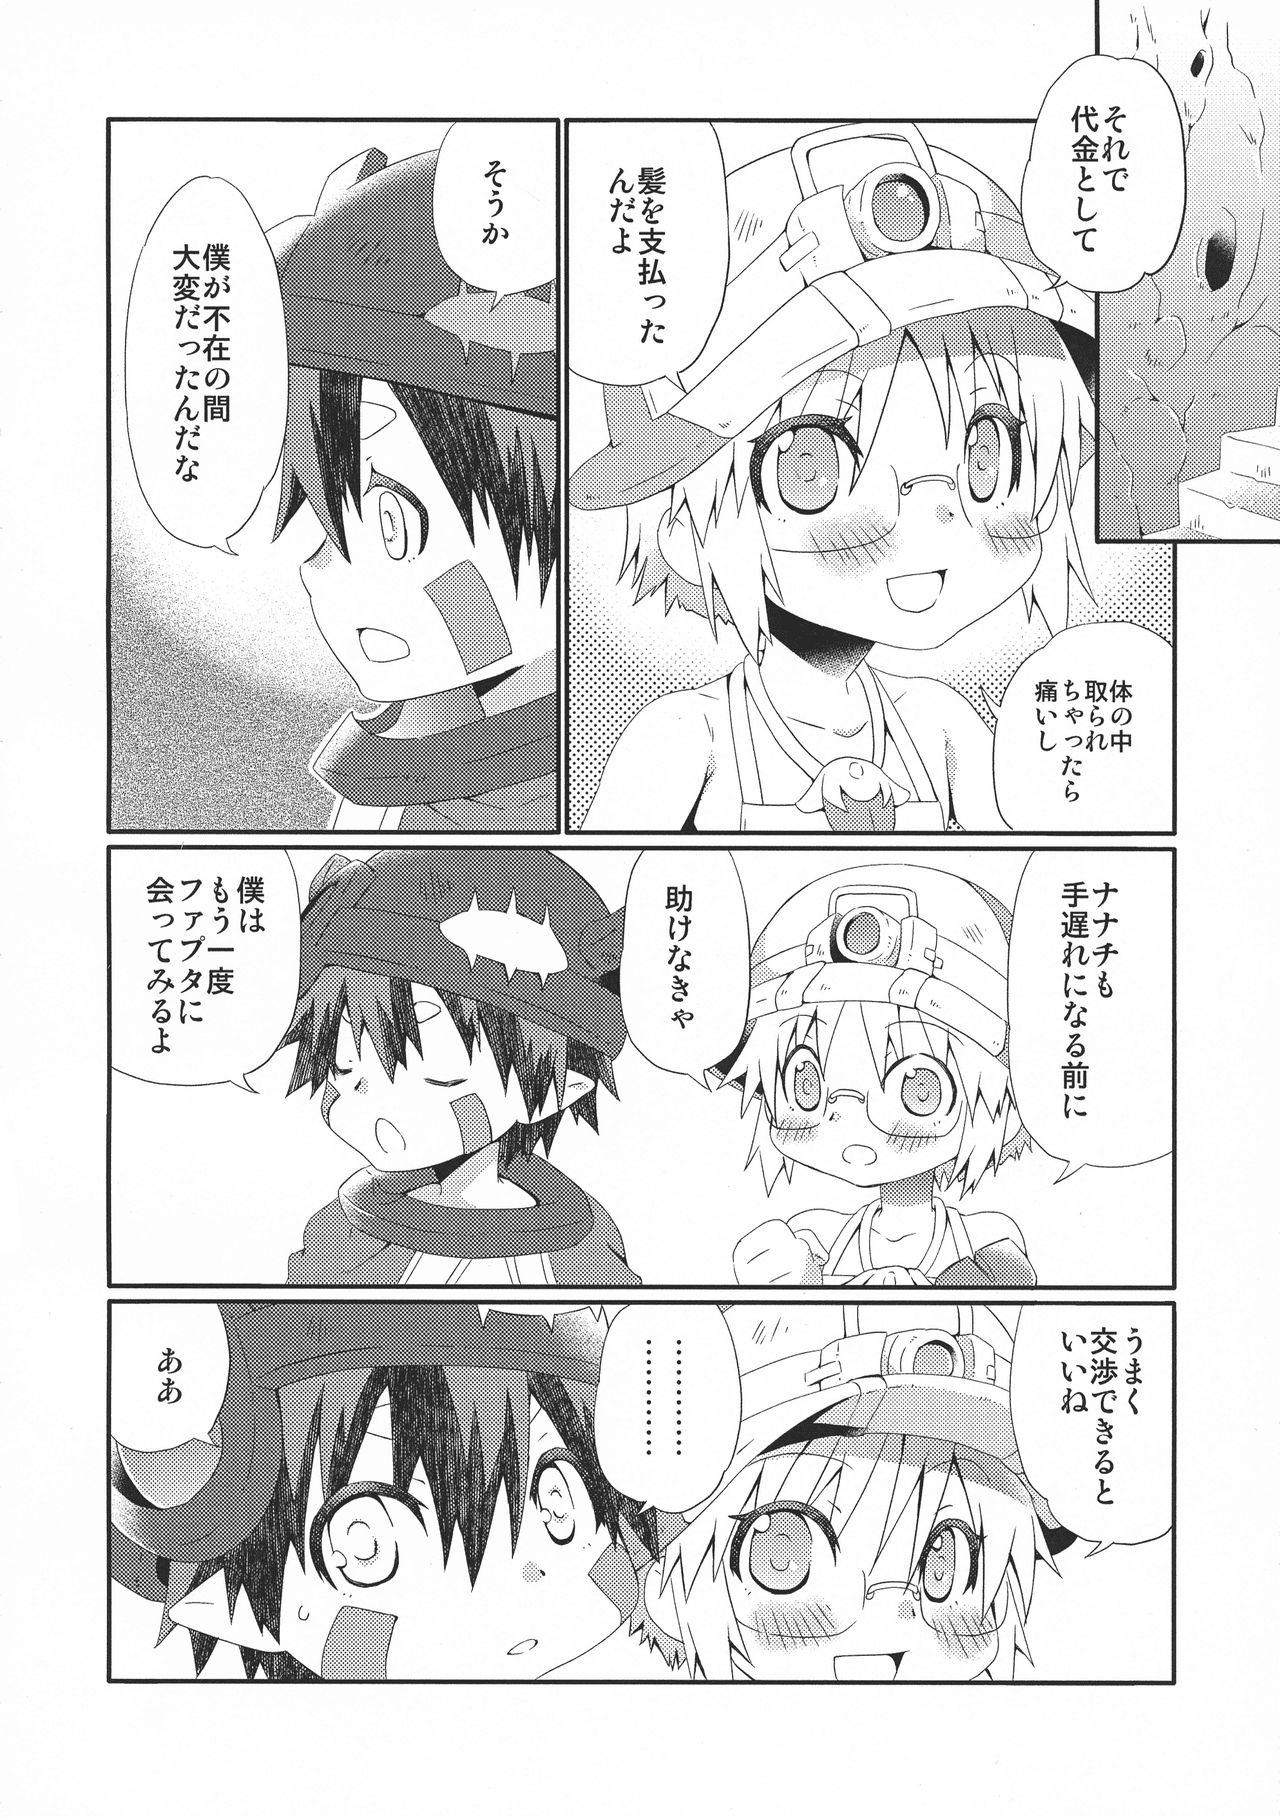 Sex Toys Tsugi no Shiji o Tanomu - Made in abyss Parties - Page 6